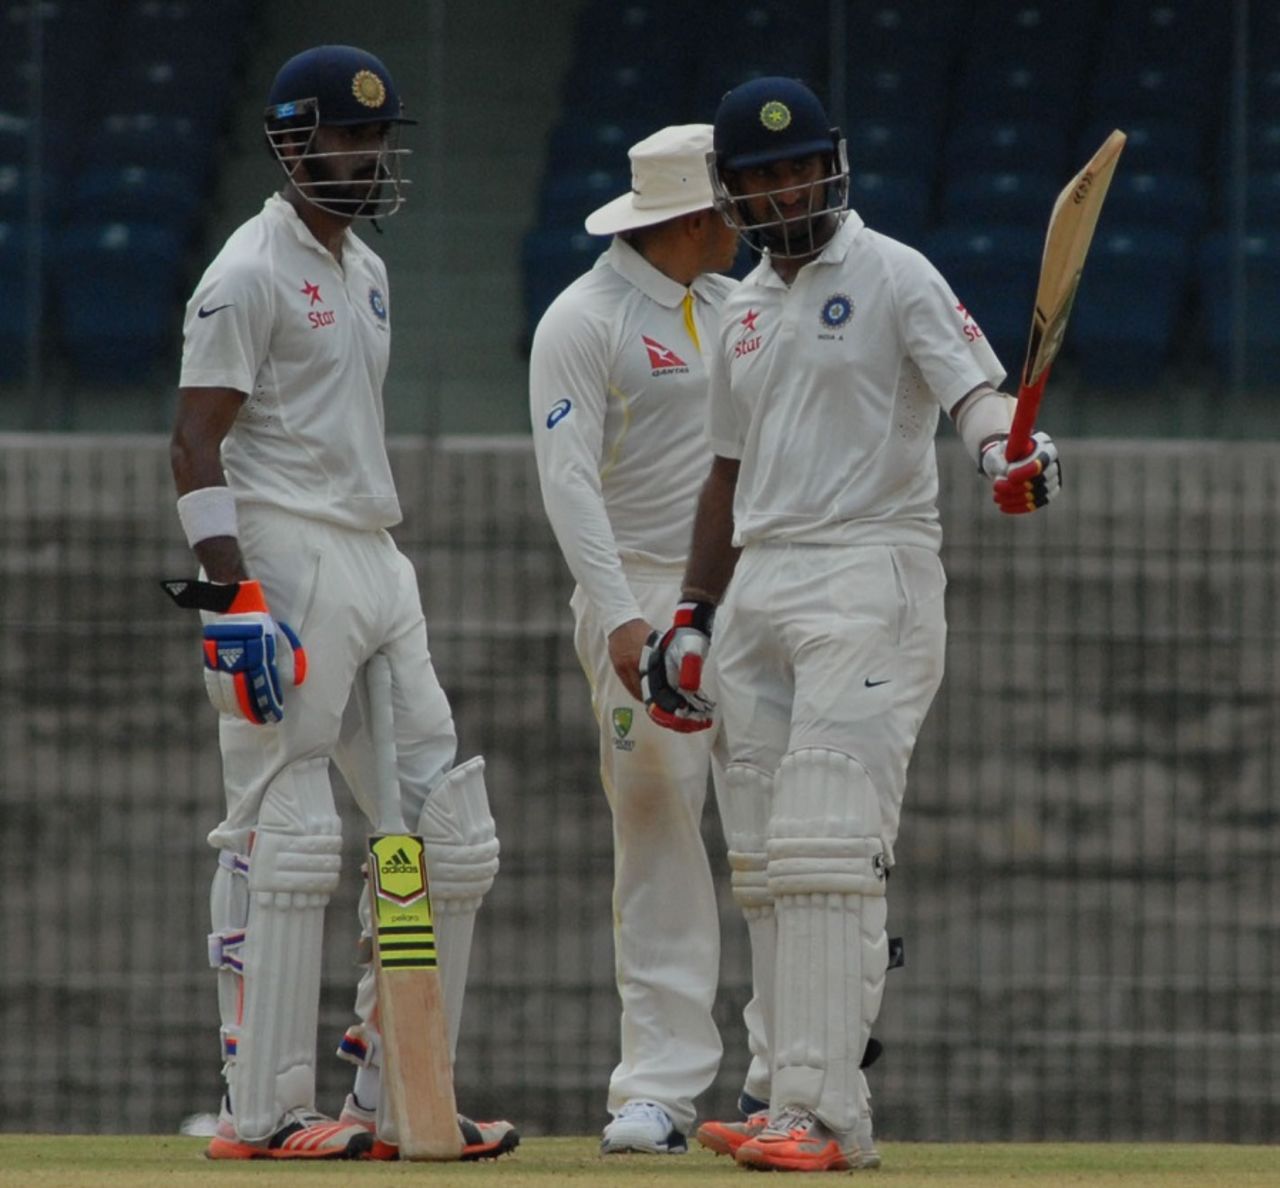 Cheteshwar Pujara raises his bat after completing his fifty, India A v Australia A, 1st unofficial Test, Chennai, 1st day